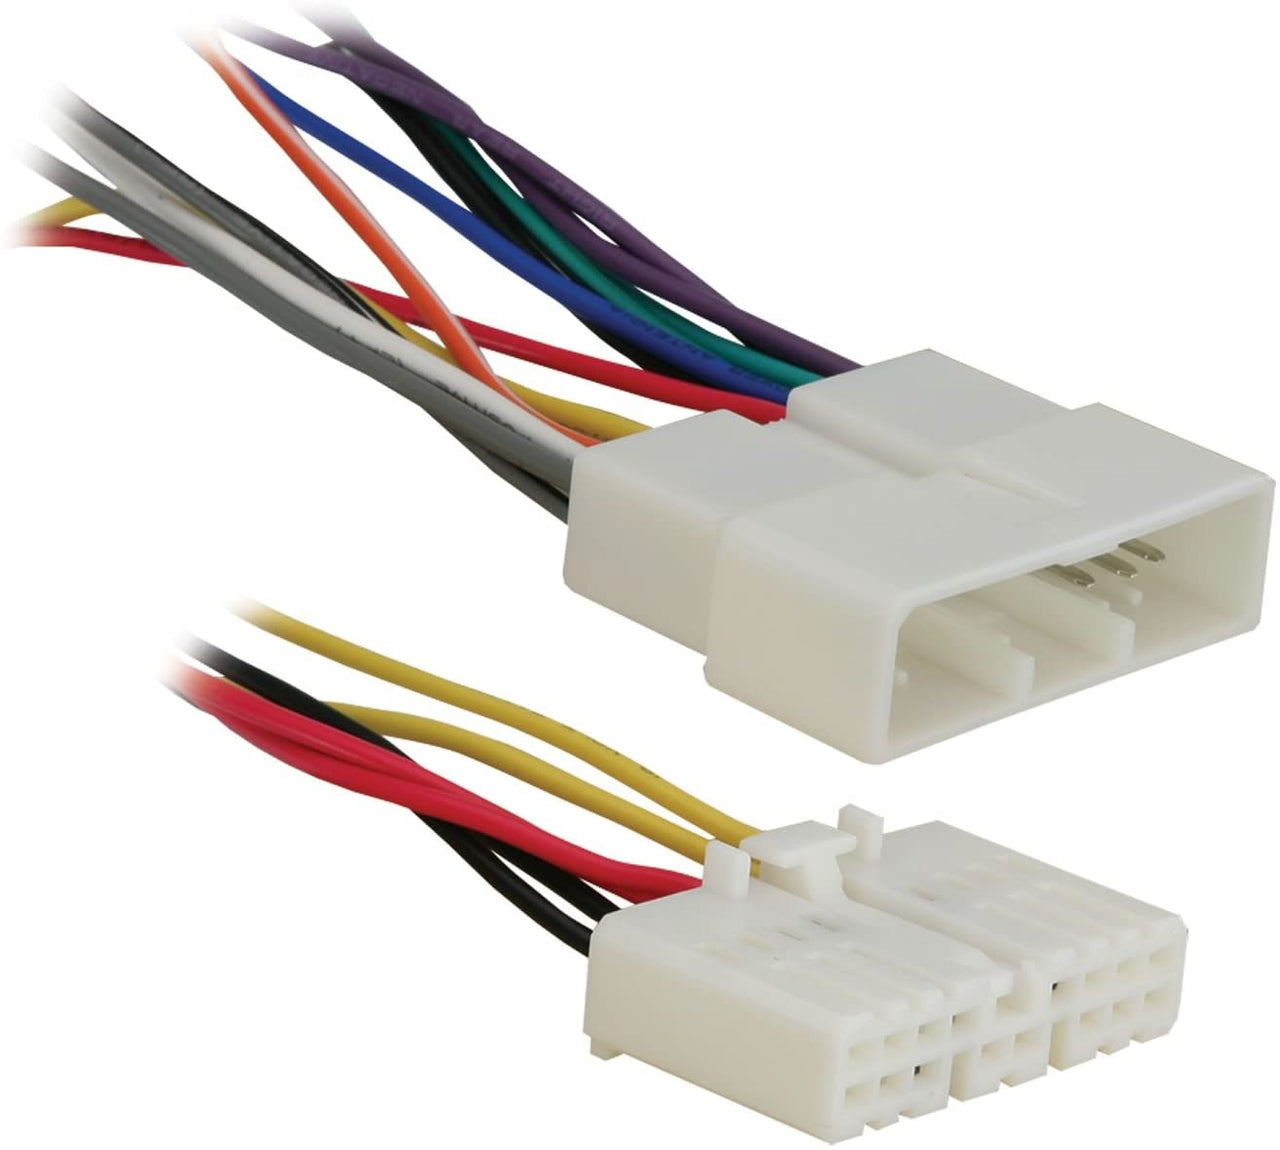 Absolute USA AH1720T<br/> Wiring Harness for 1996-1998 Honda Civic Vehicles with Keyless Entry Retainment